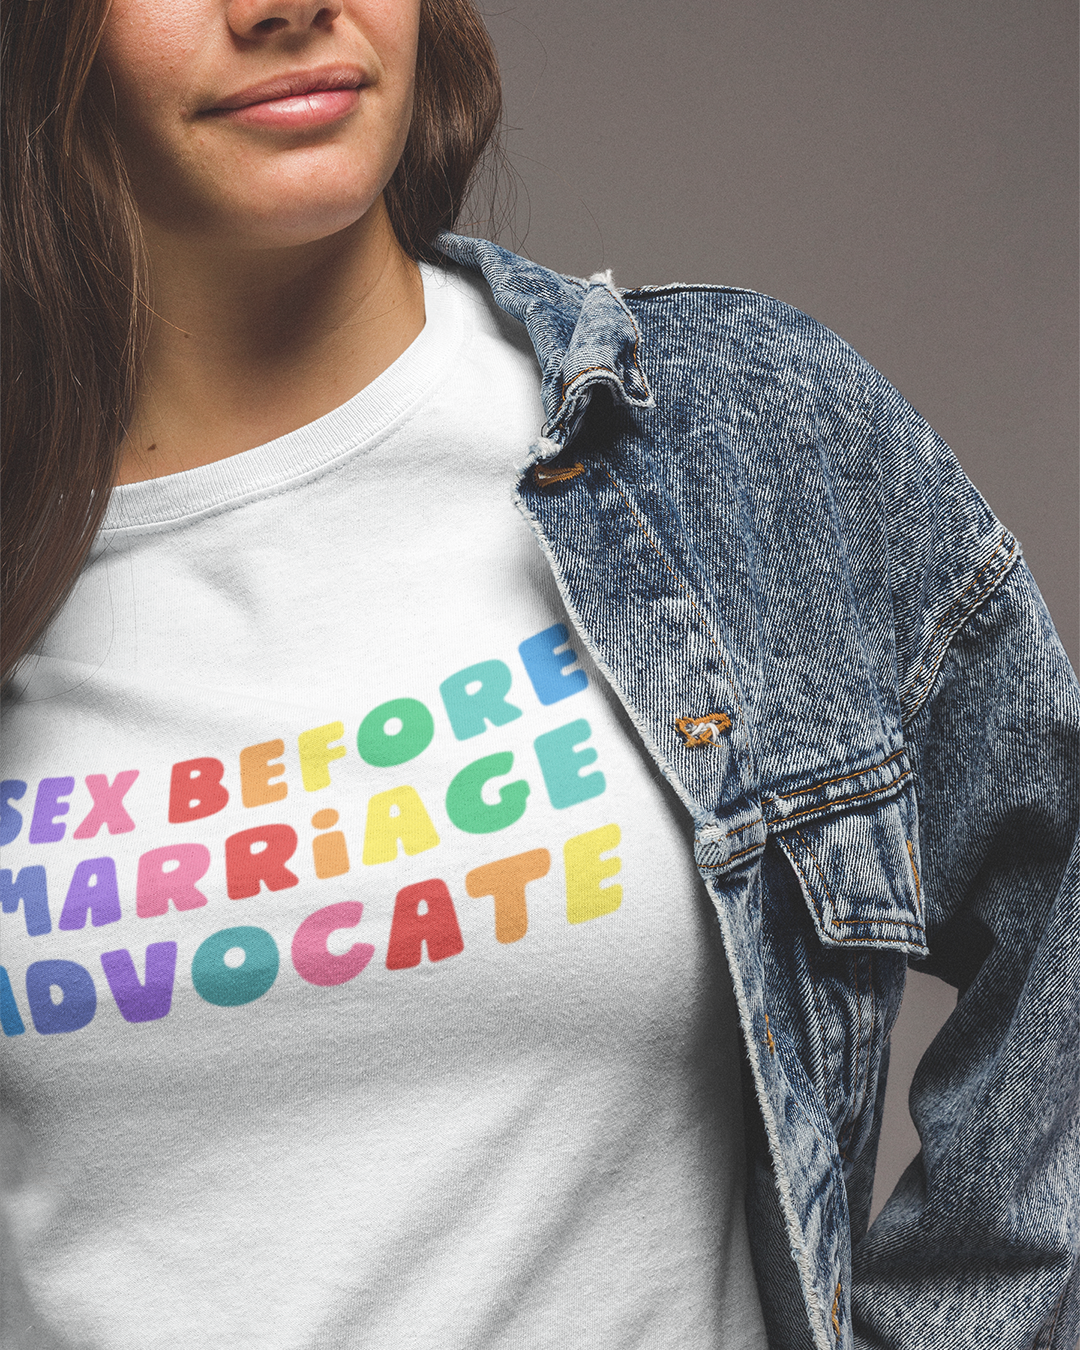 Sex Before Marriage Advocate T-Shirt - Funny LGBT Inspired T-Shirt - LGBT Pride T-Shirt - LGBT Pride T-Shirt